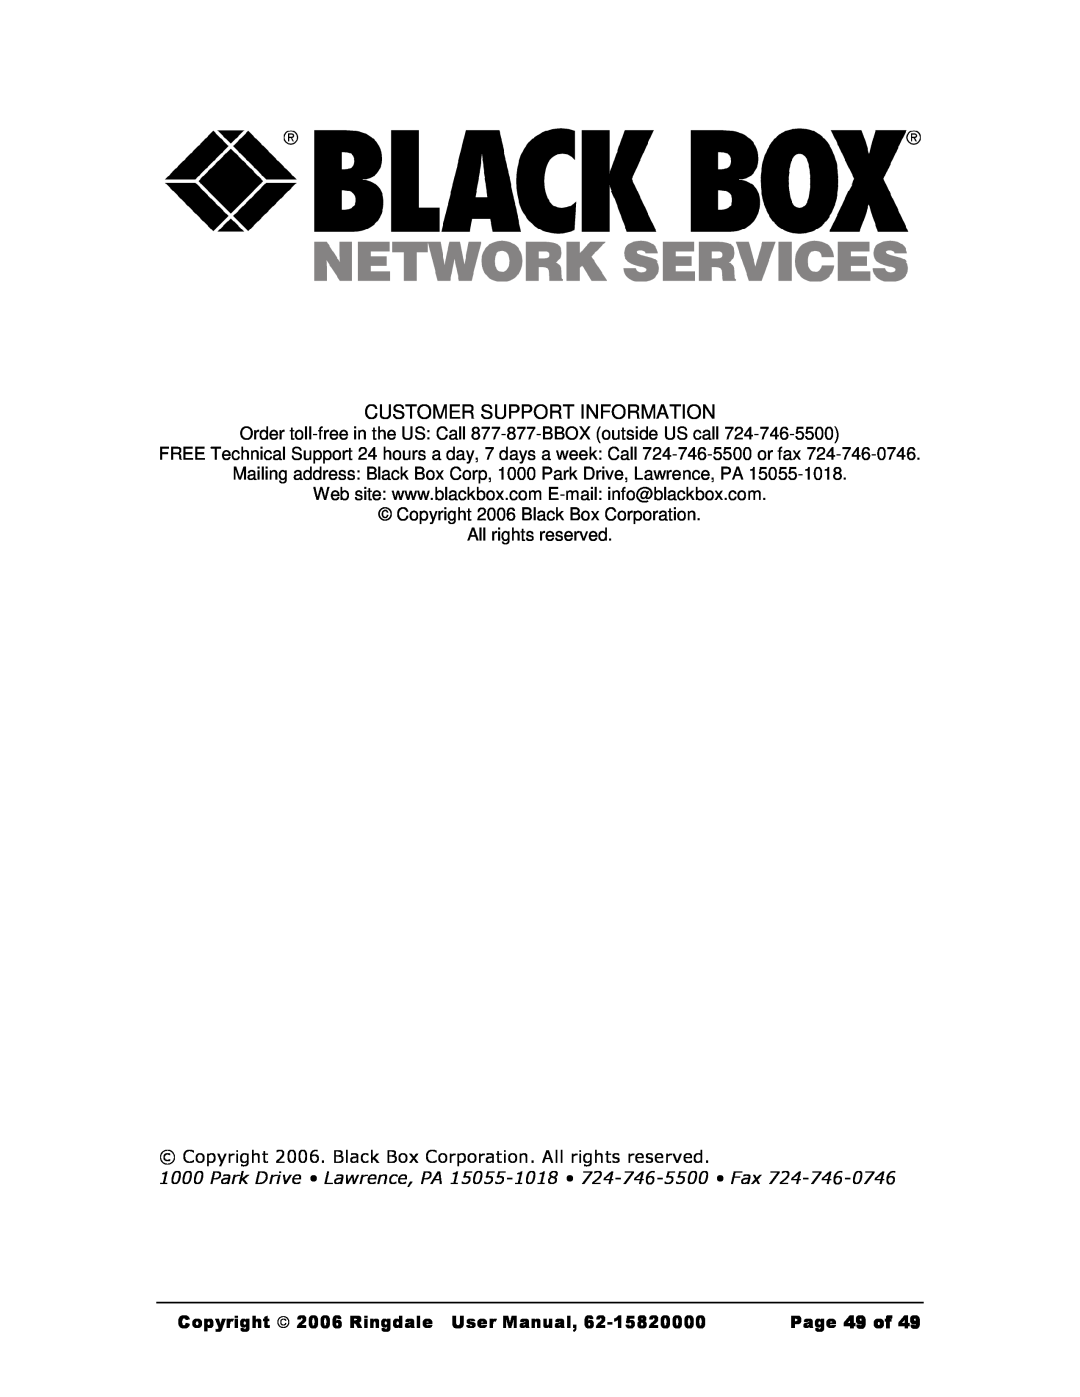 Black Box Black Box Network Services FaxReceiver Customer Support Information, Copyright  2006 Ringdale User Manual 